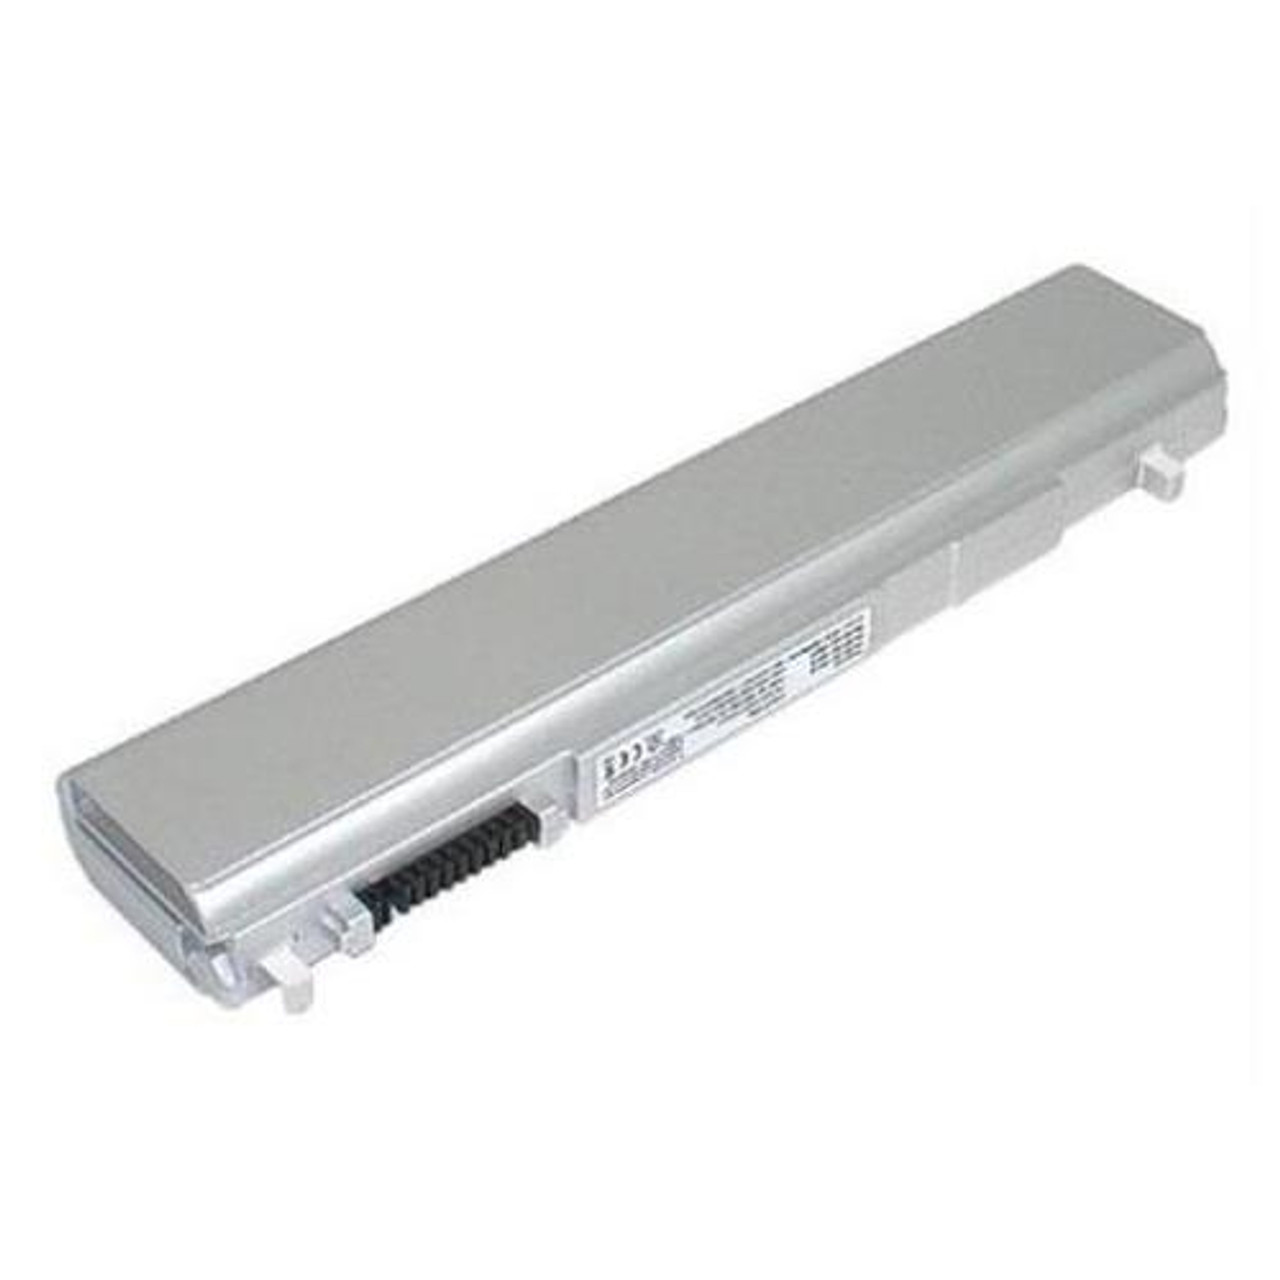 PA2441U Battery For Toshiba Protege 300CT Laptop